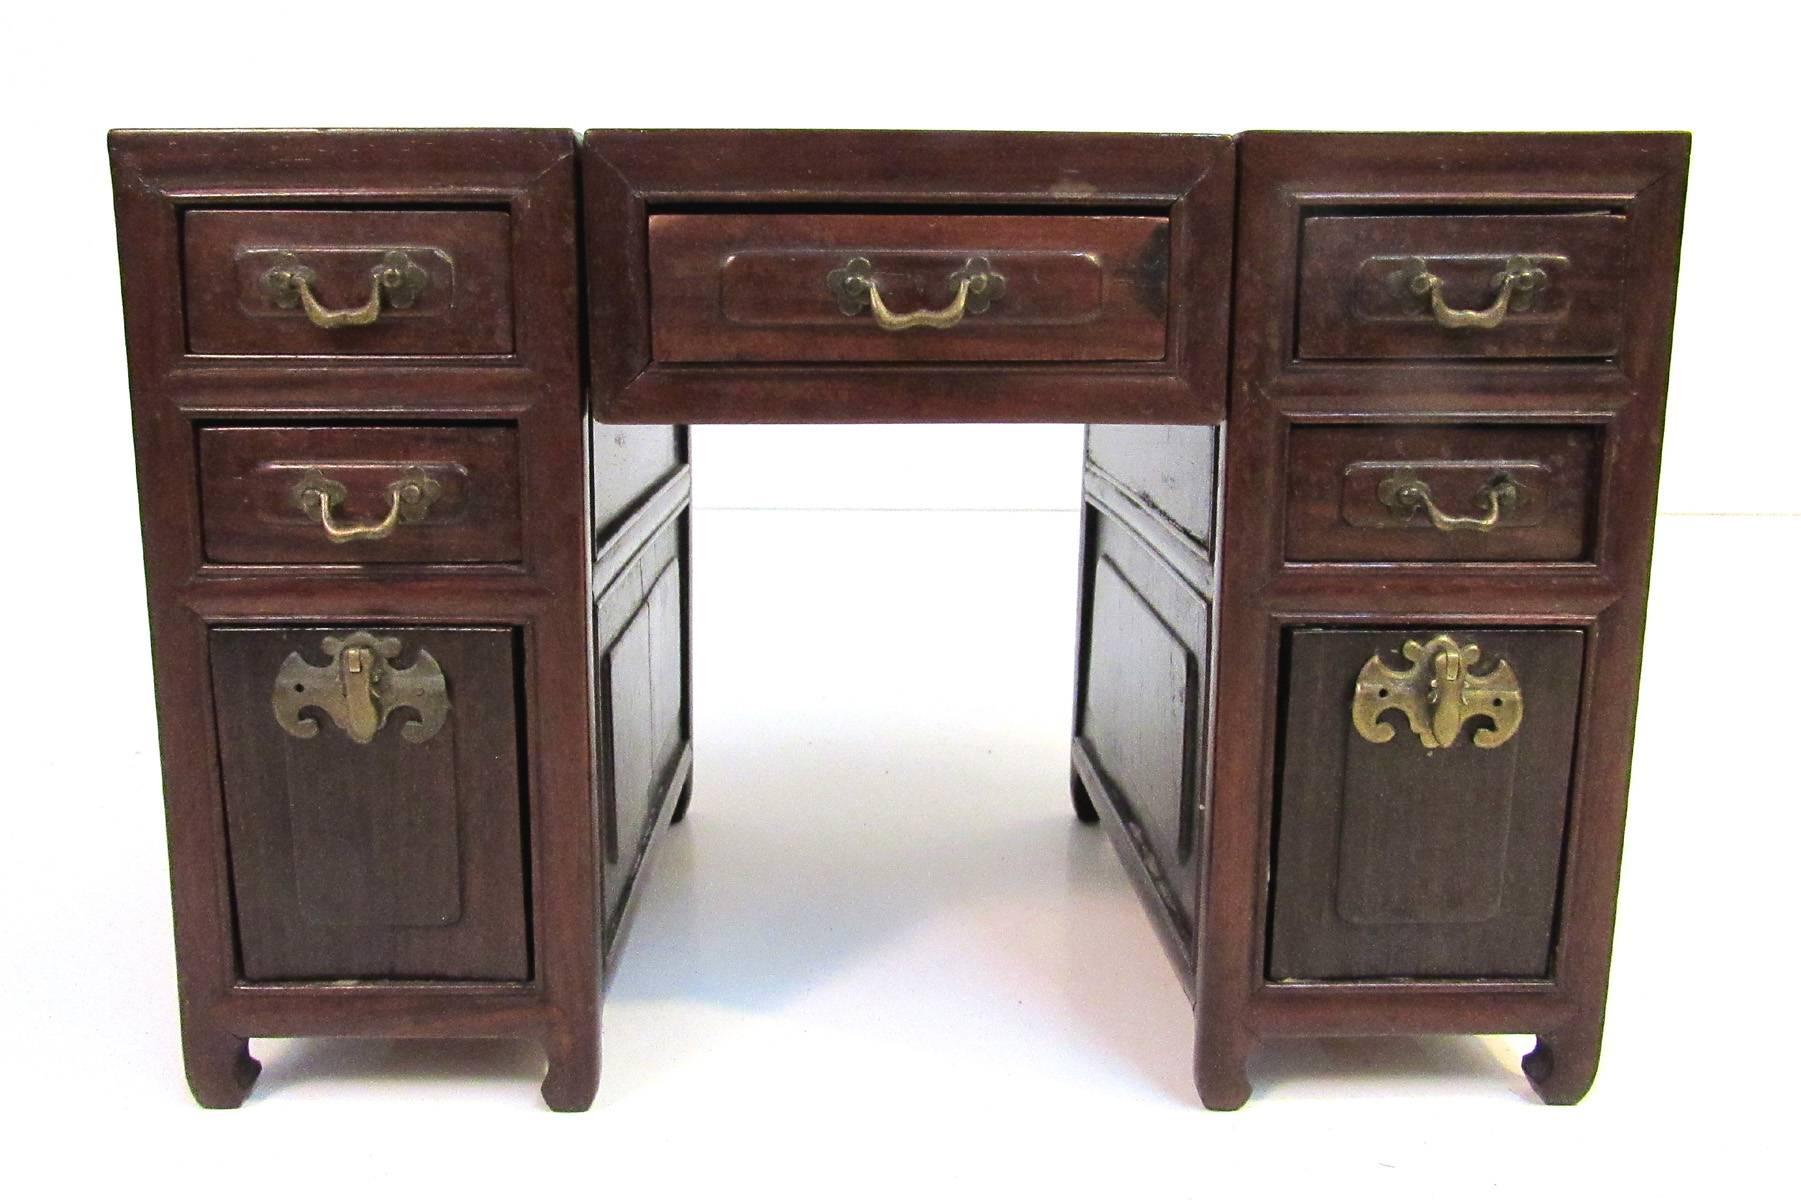 Hand-Crafted Early 19th Century Chinese Miniature Desk